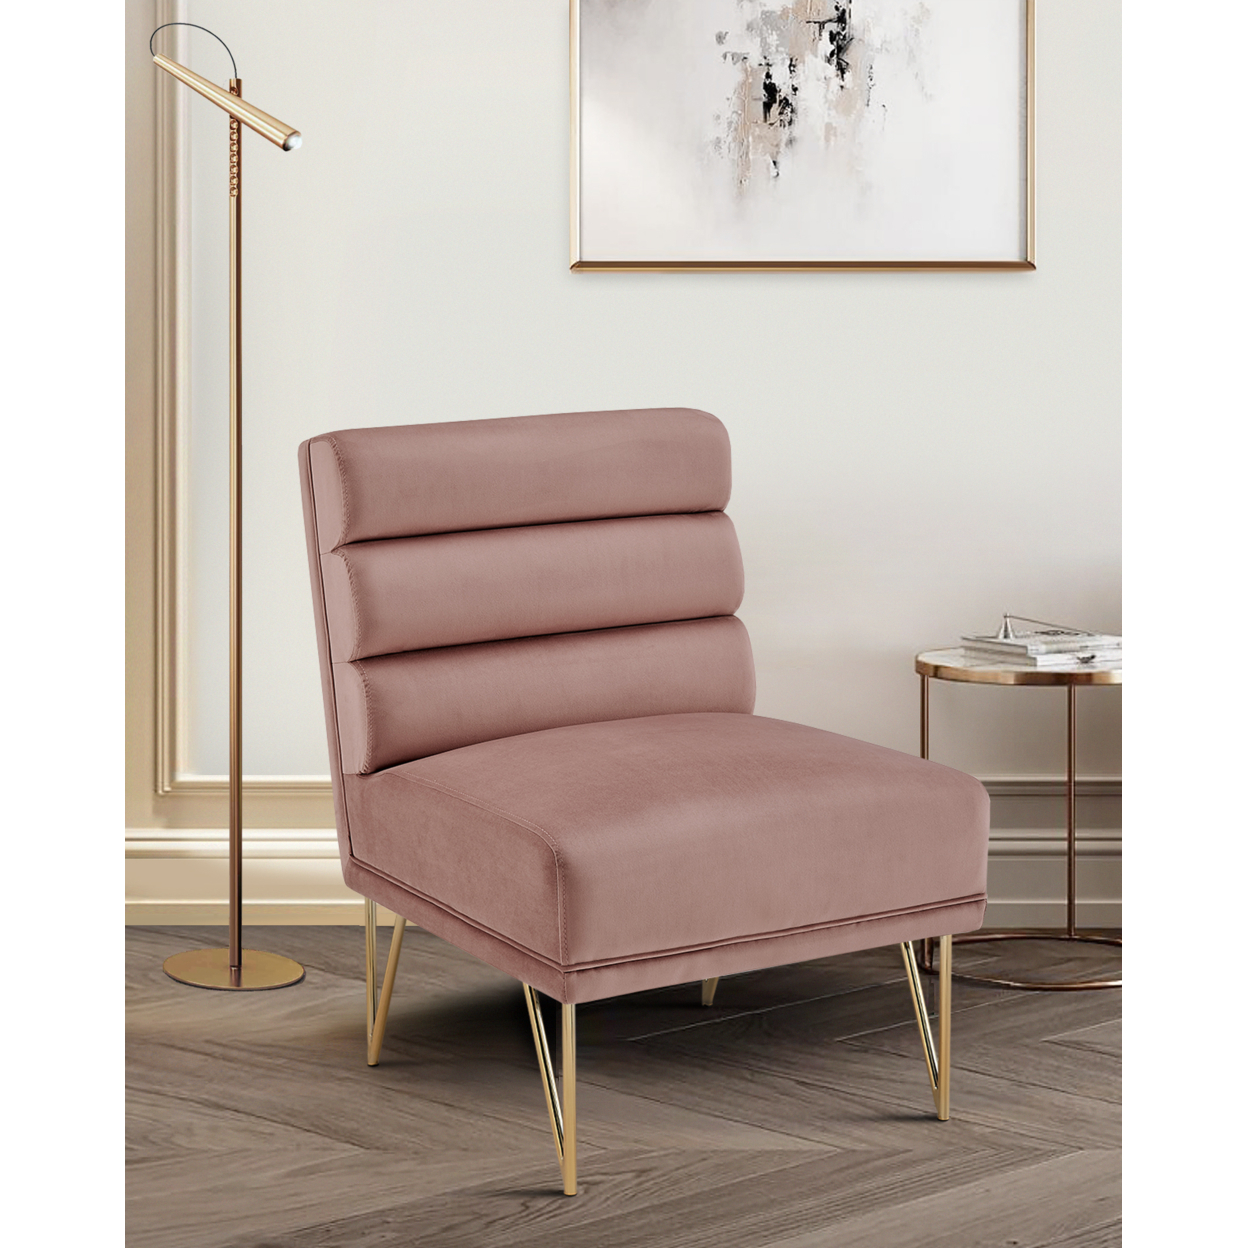 Iconic Home Karli Slipper Accent Chair Velvet Upholstered Tufted Horizontal Tufted Channel Quilted Seat - Blush